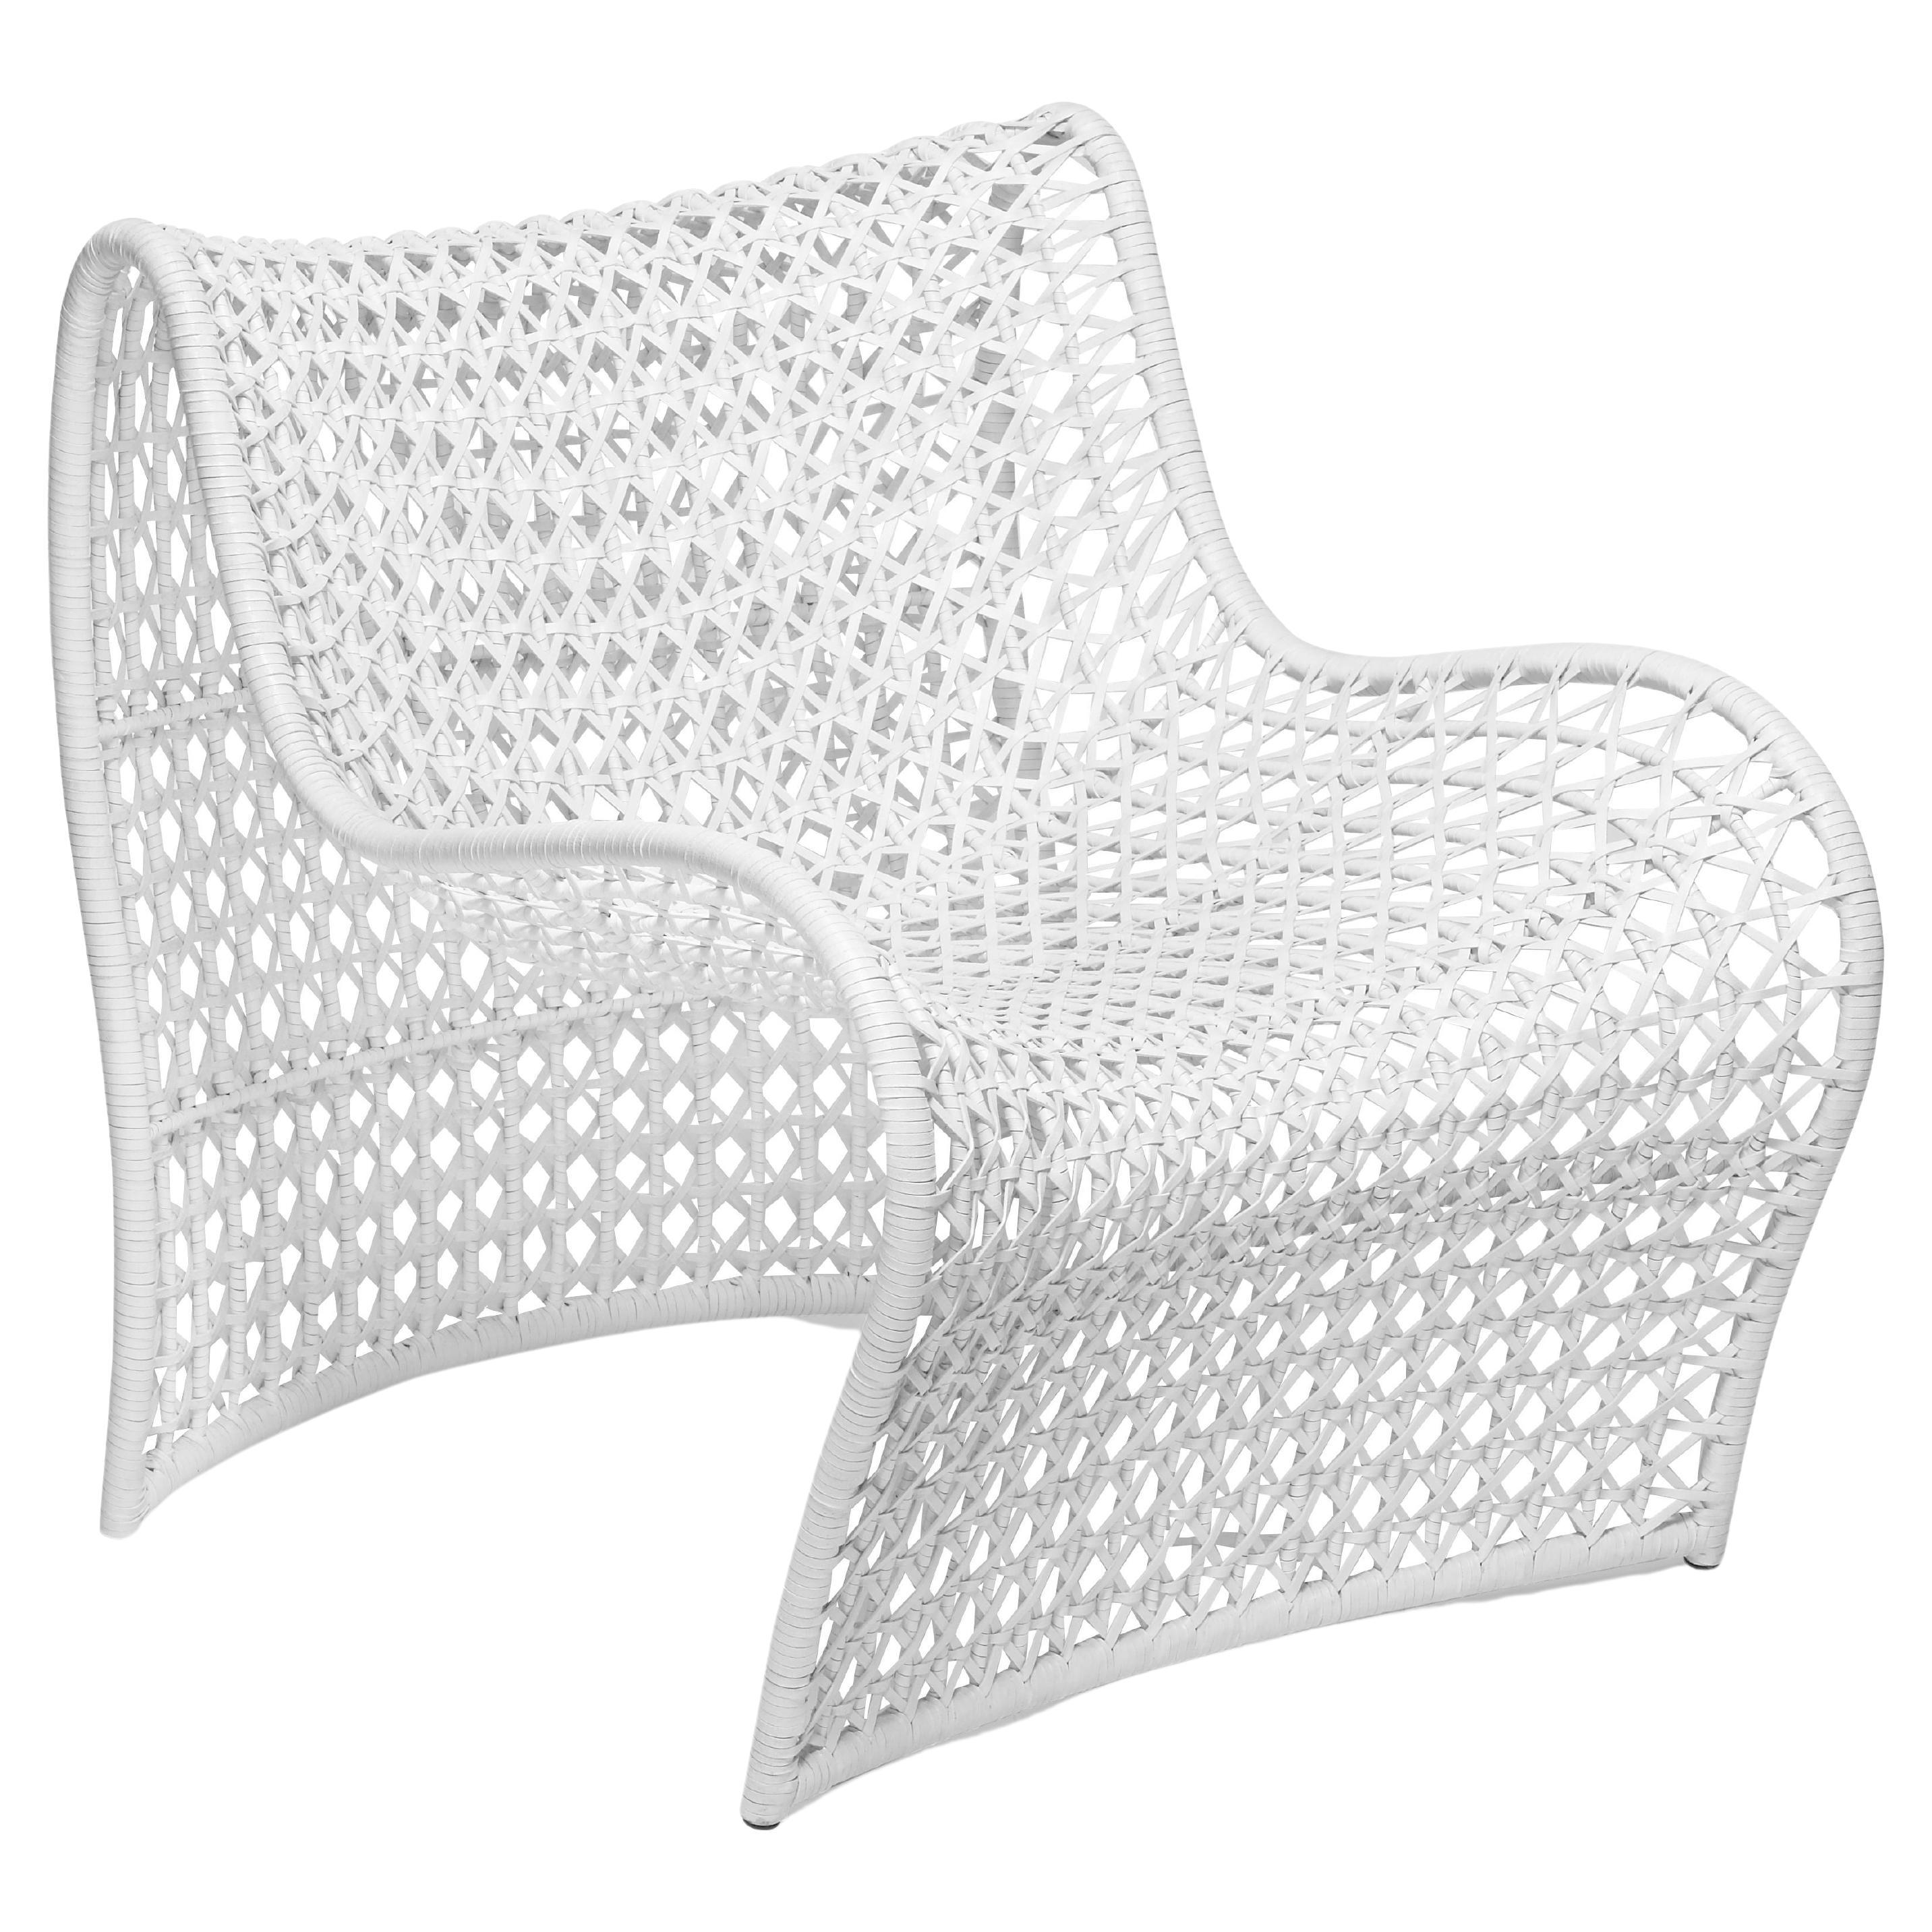 Lola Open Weave Leather Chair For Sale